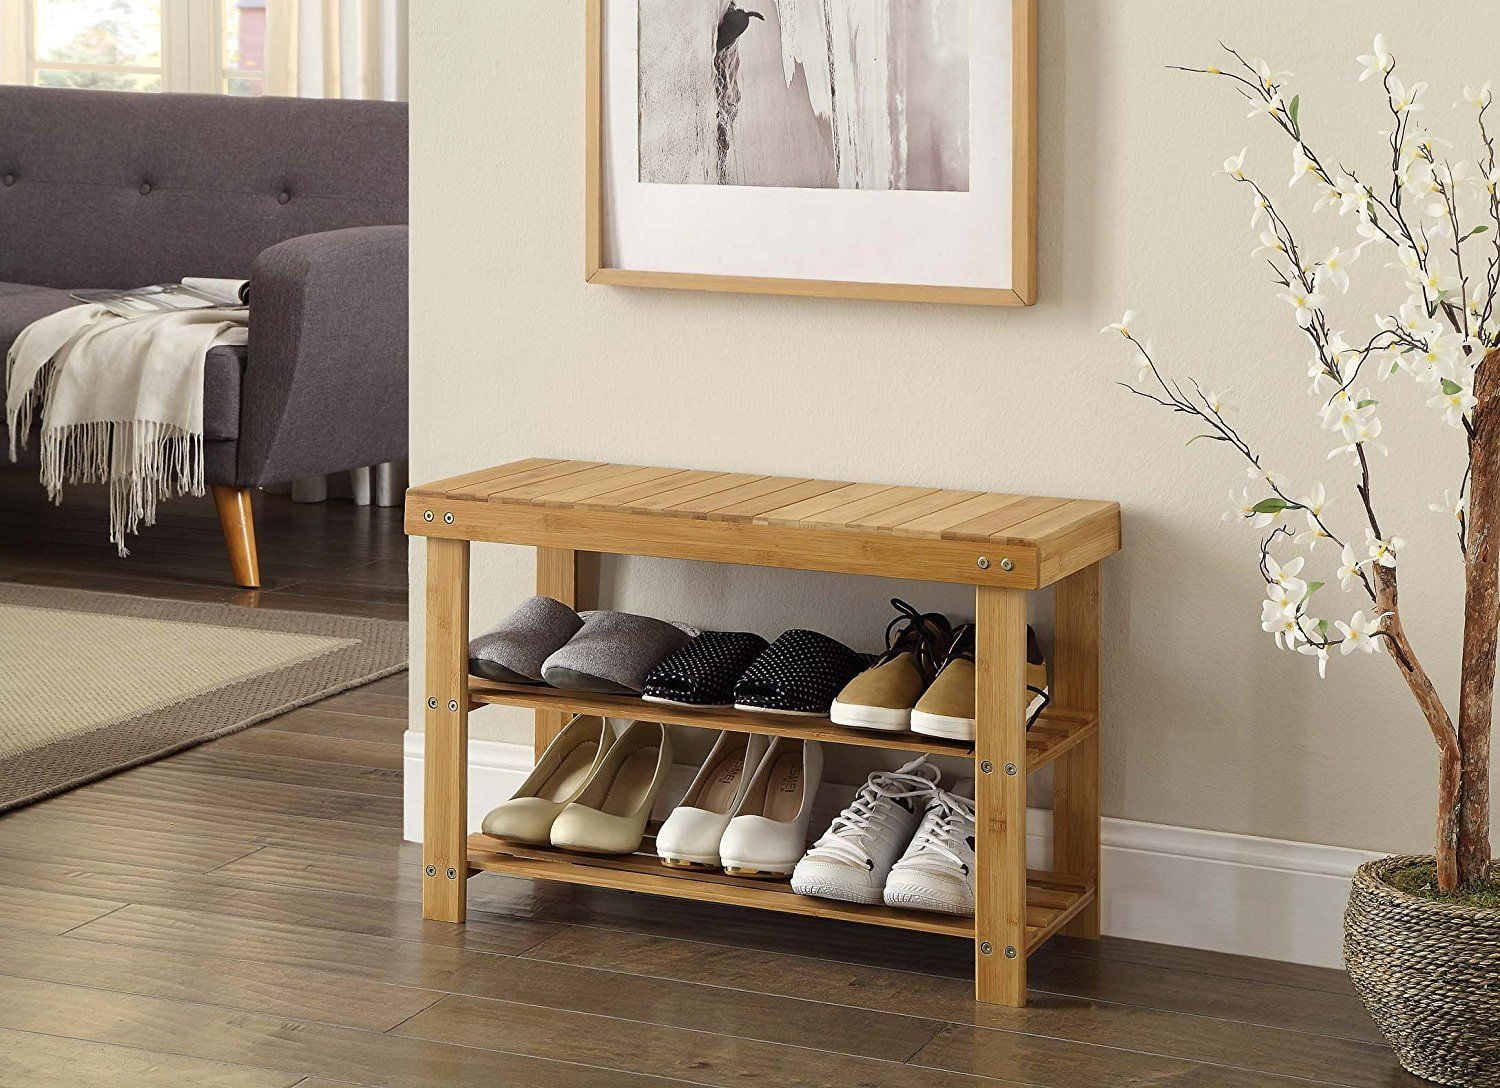 3-Tier Entryway Organizer Shelf with Storage Drawer,Holds Up to 280Lbs for Hallway Bedroom Living Room,27.5x11x17.5 Bamboo Shoe Rack Bench